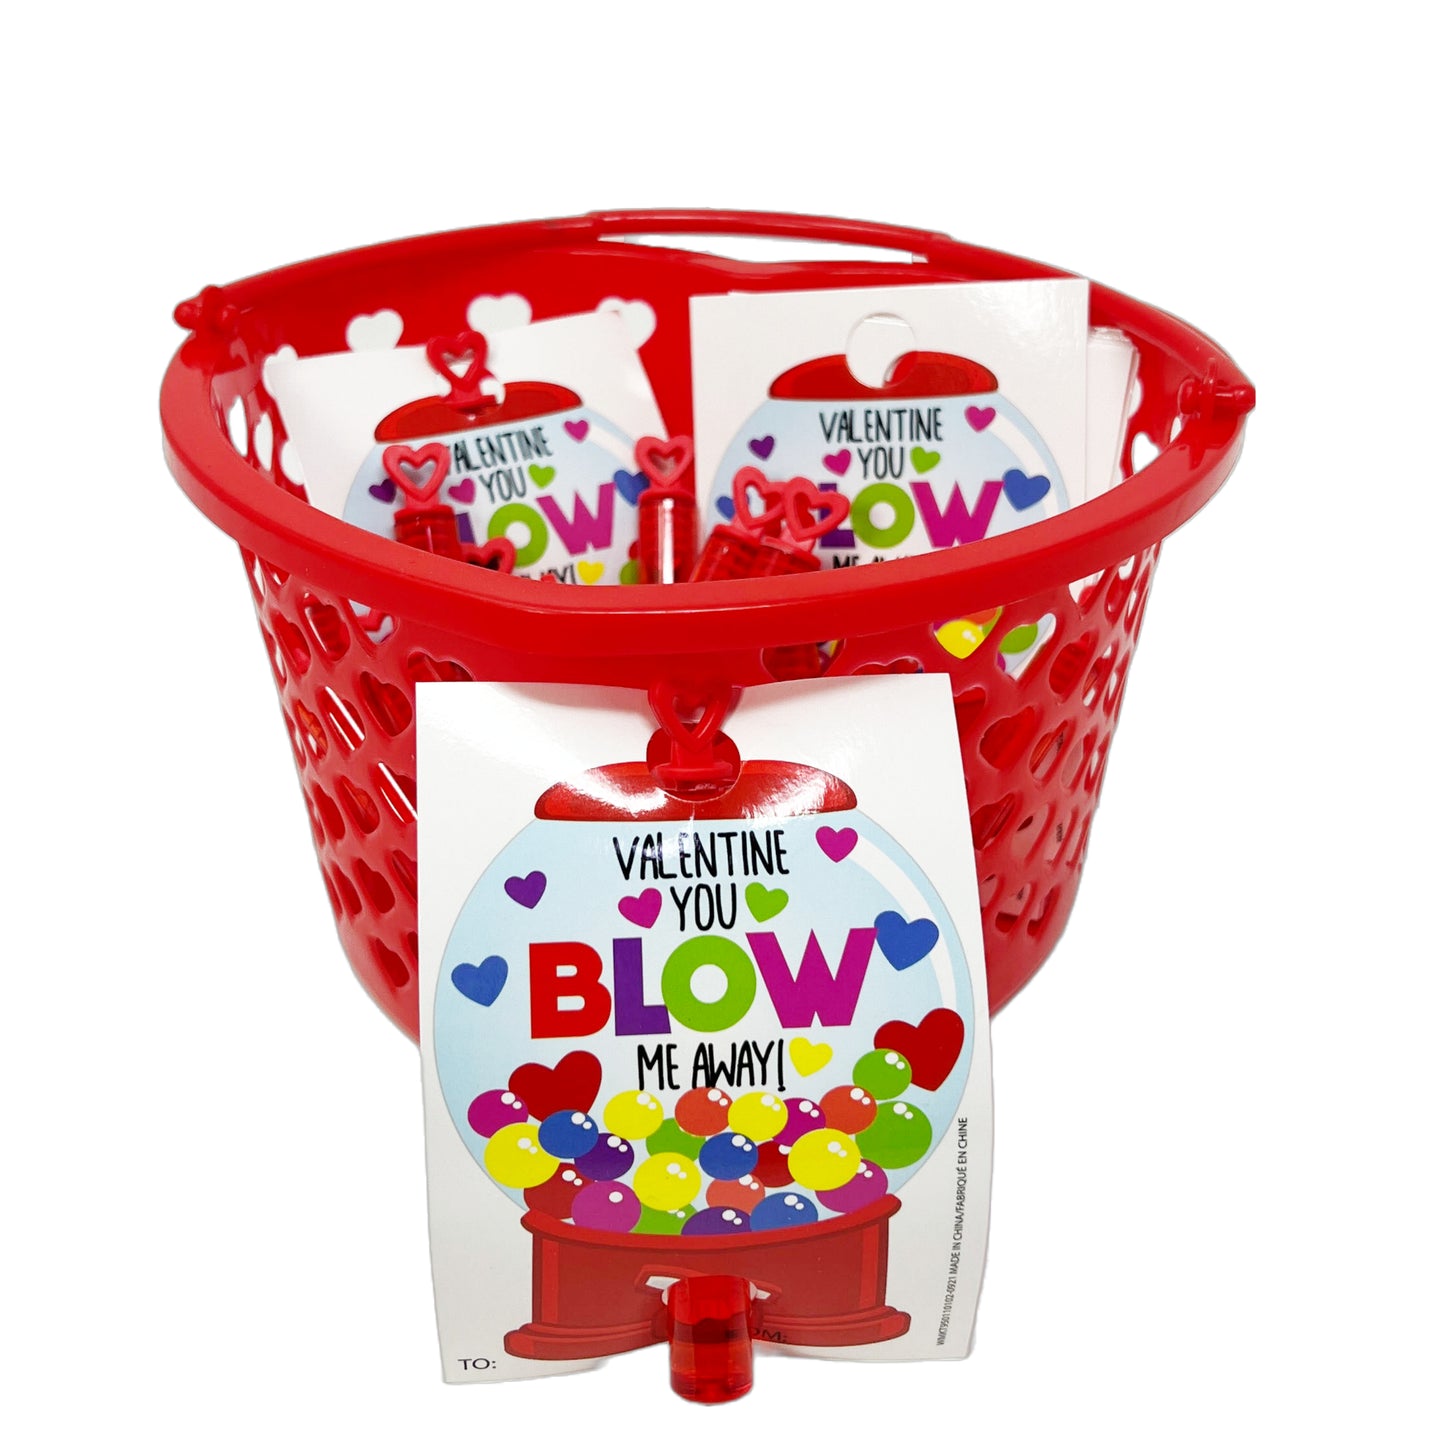 Cheep N Cheerful Valentine Kiddie Card Heart Basket with 16ct Bubble Wands and Cards, Valentine Party Favors, Kids Valentine